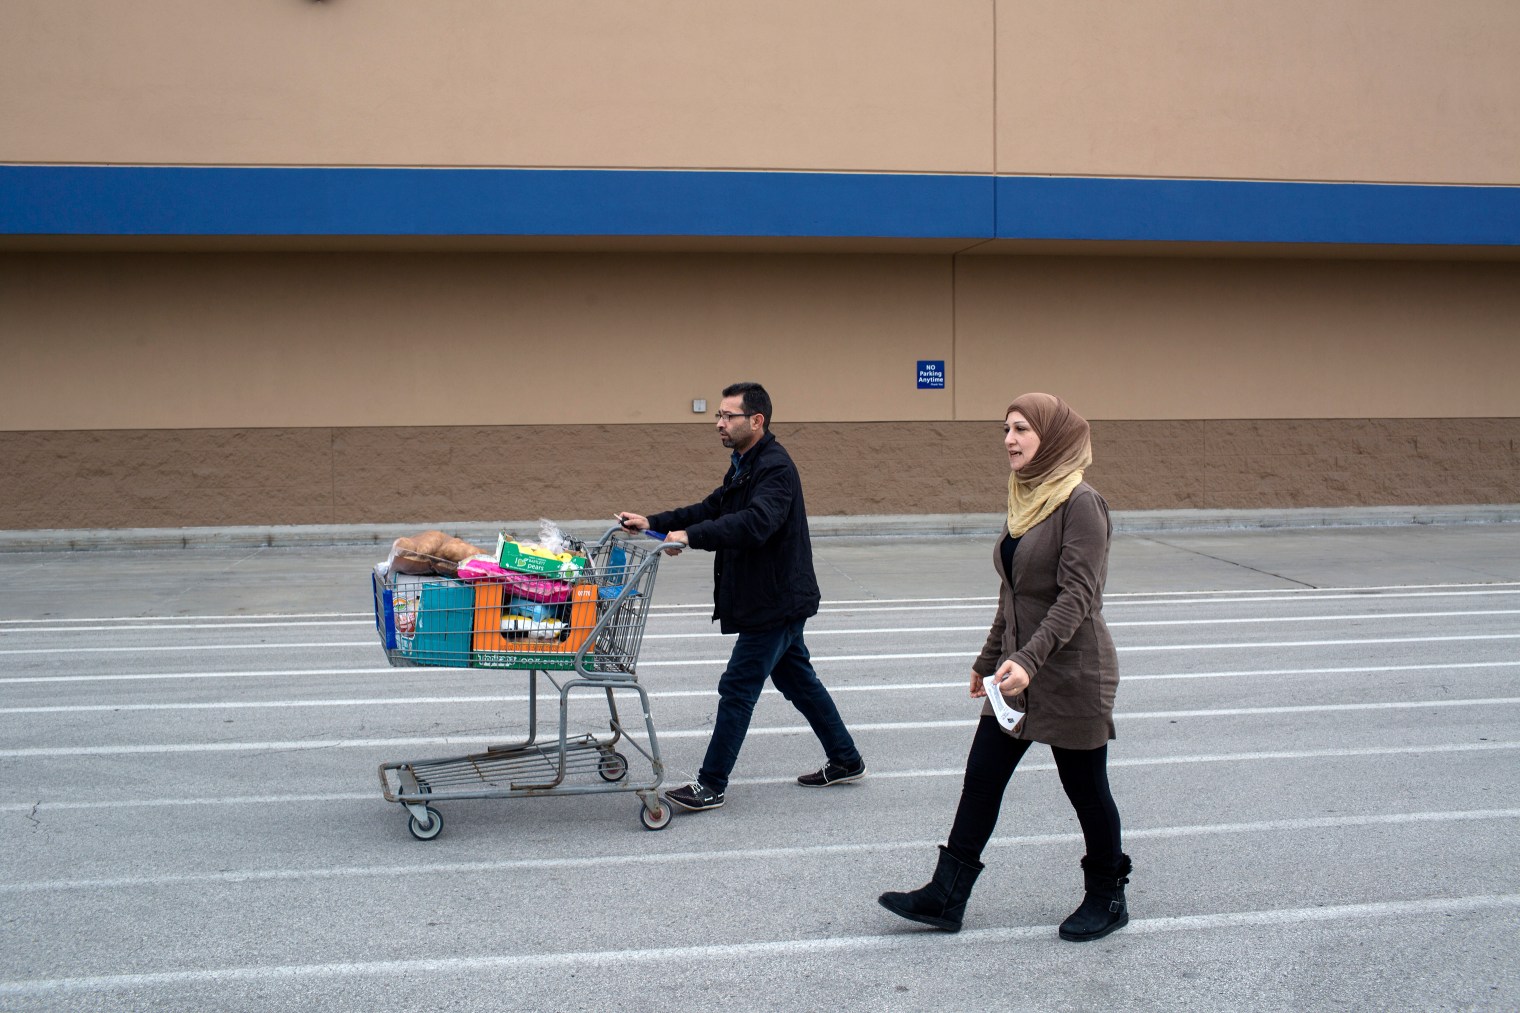 Abdul Fattah Tameem and his wife, Ghazweh Aljabooli, leave the store after shopping for their family. The parents of five moved their family to West Des Moines, a suburb of Des Moines, Iowa.